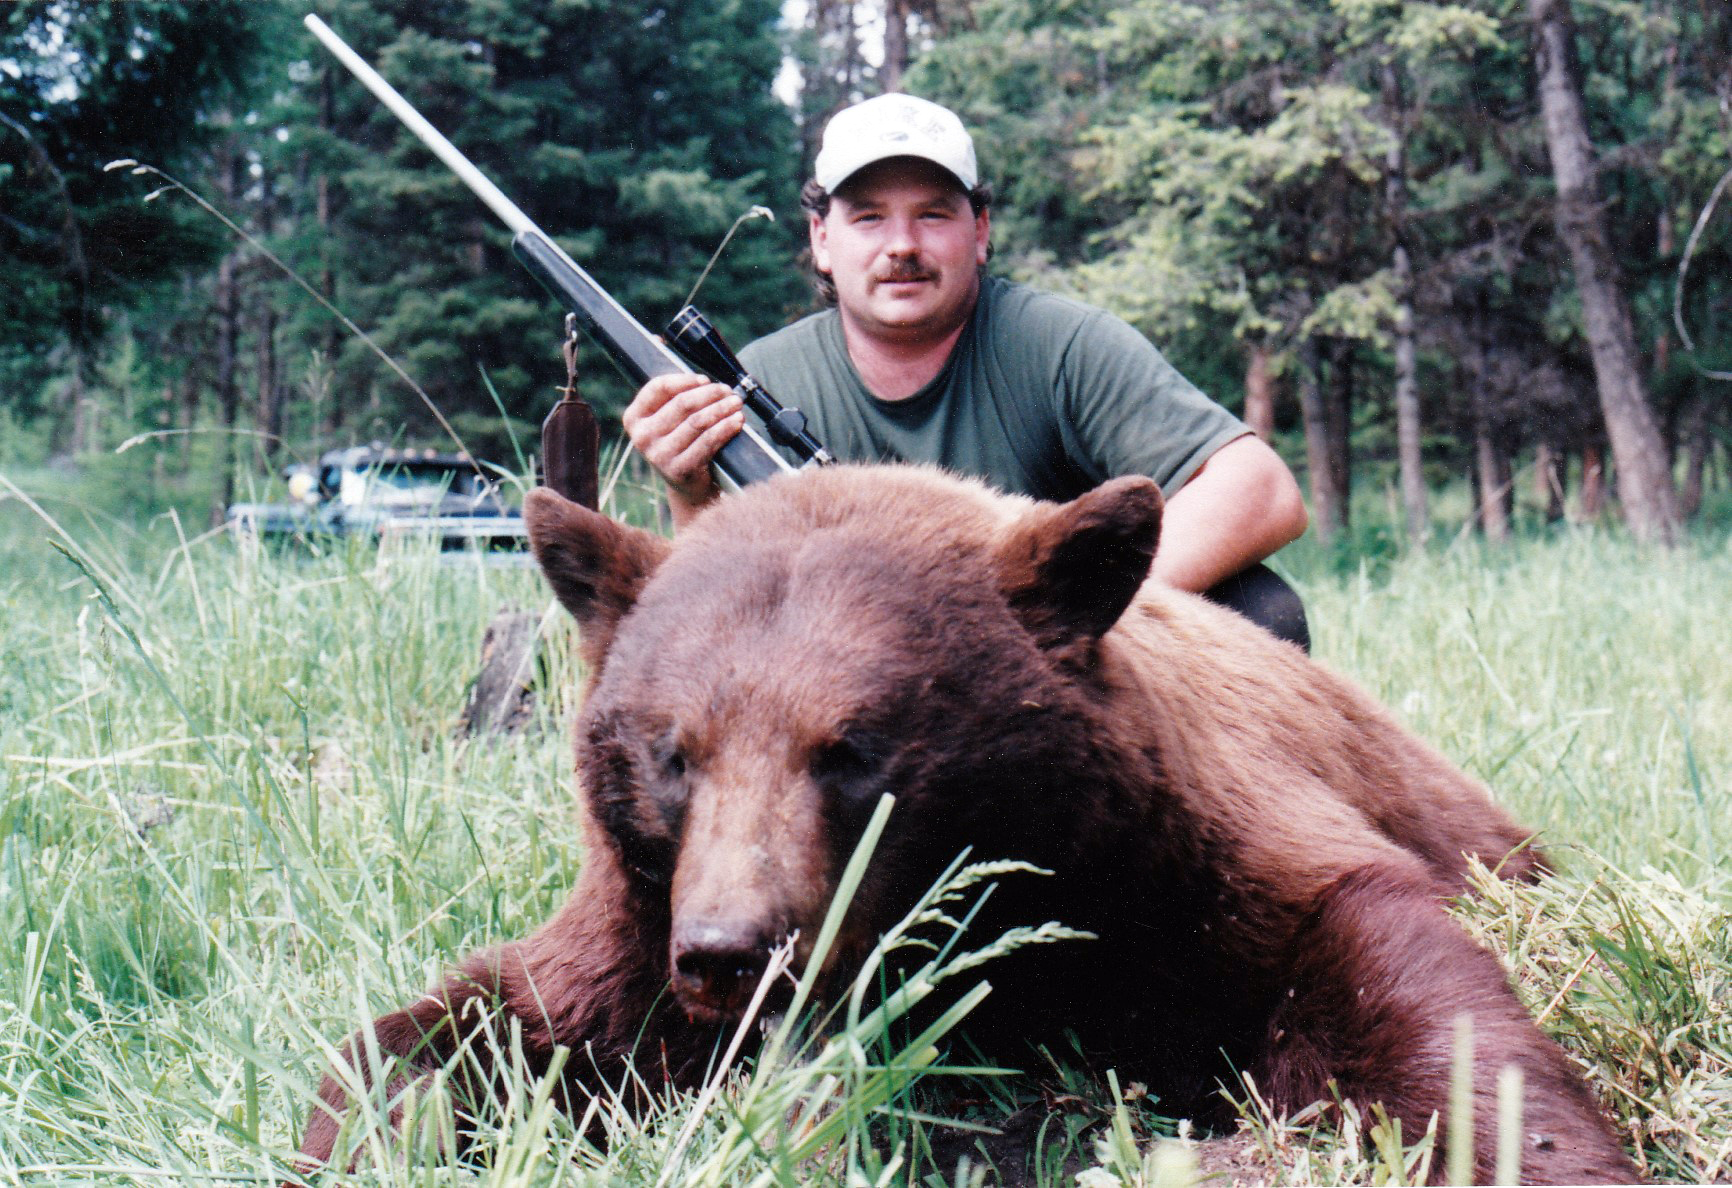 B.C. guide outfitter handed hefty fine for luring black bear with pet